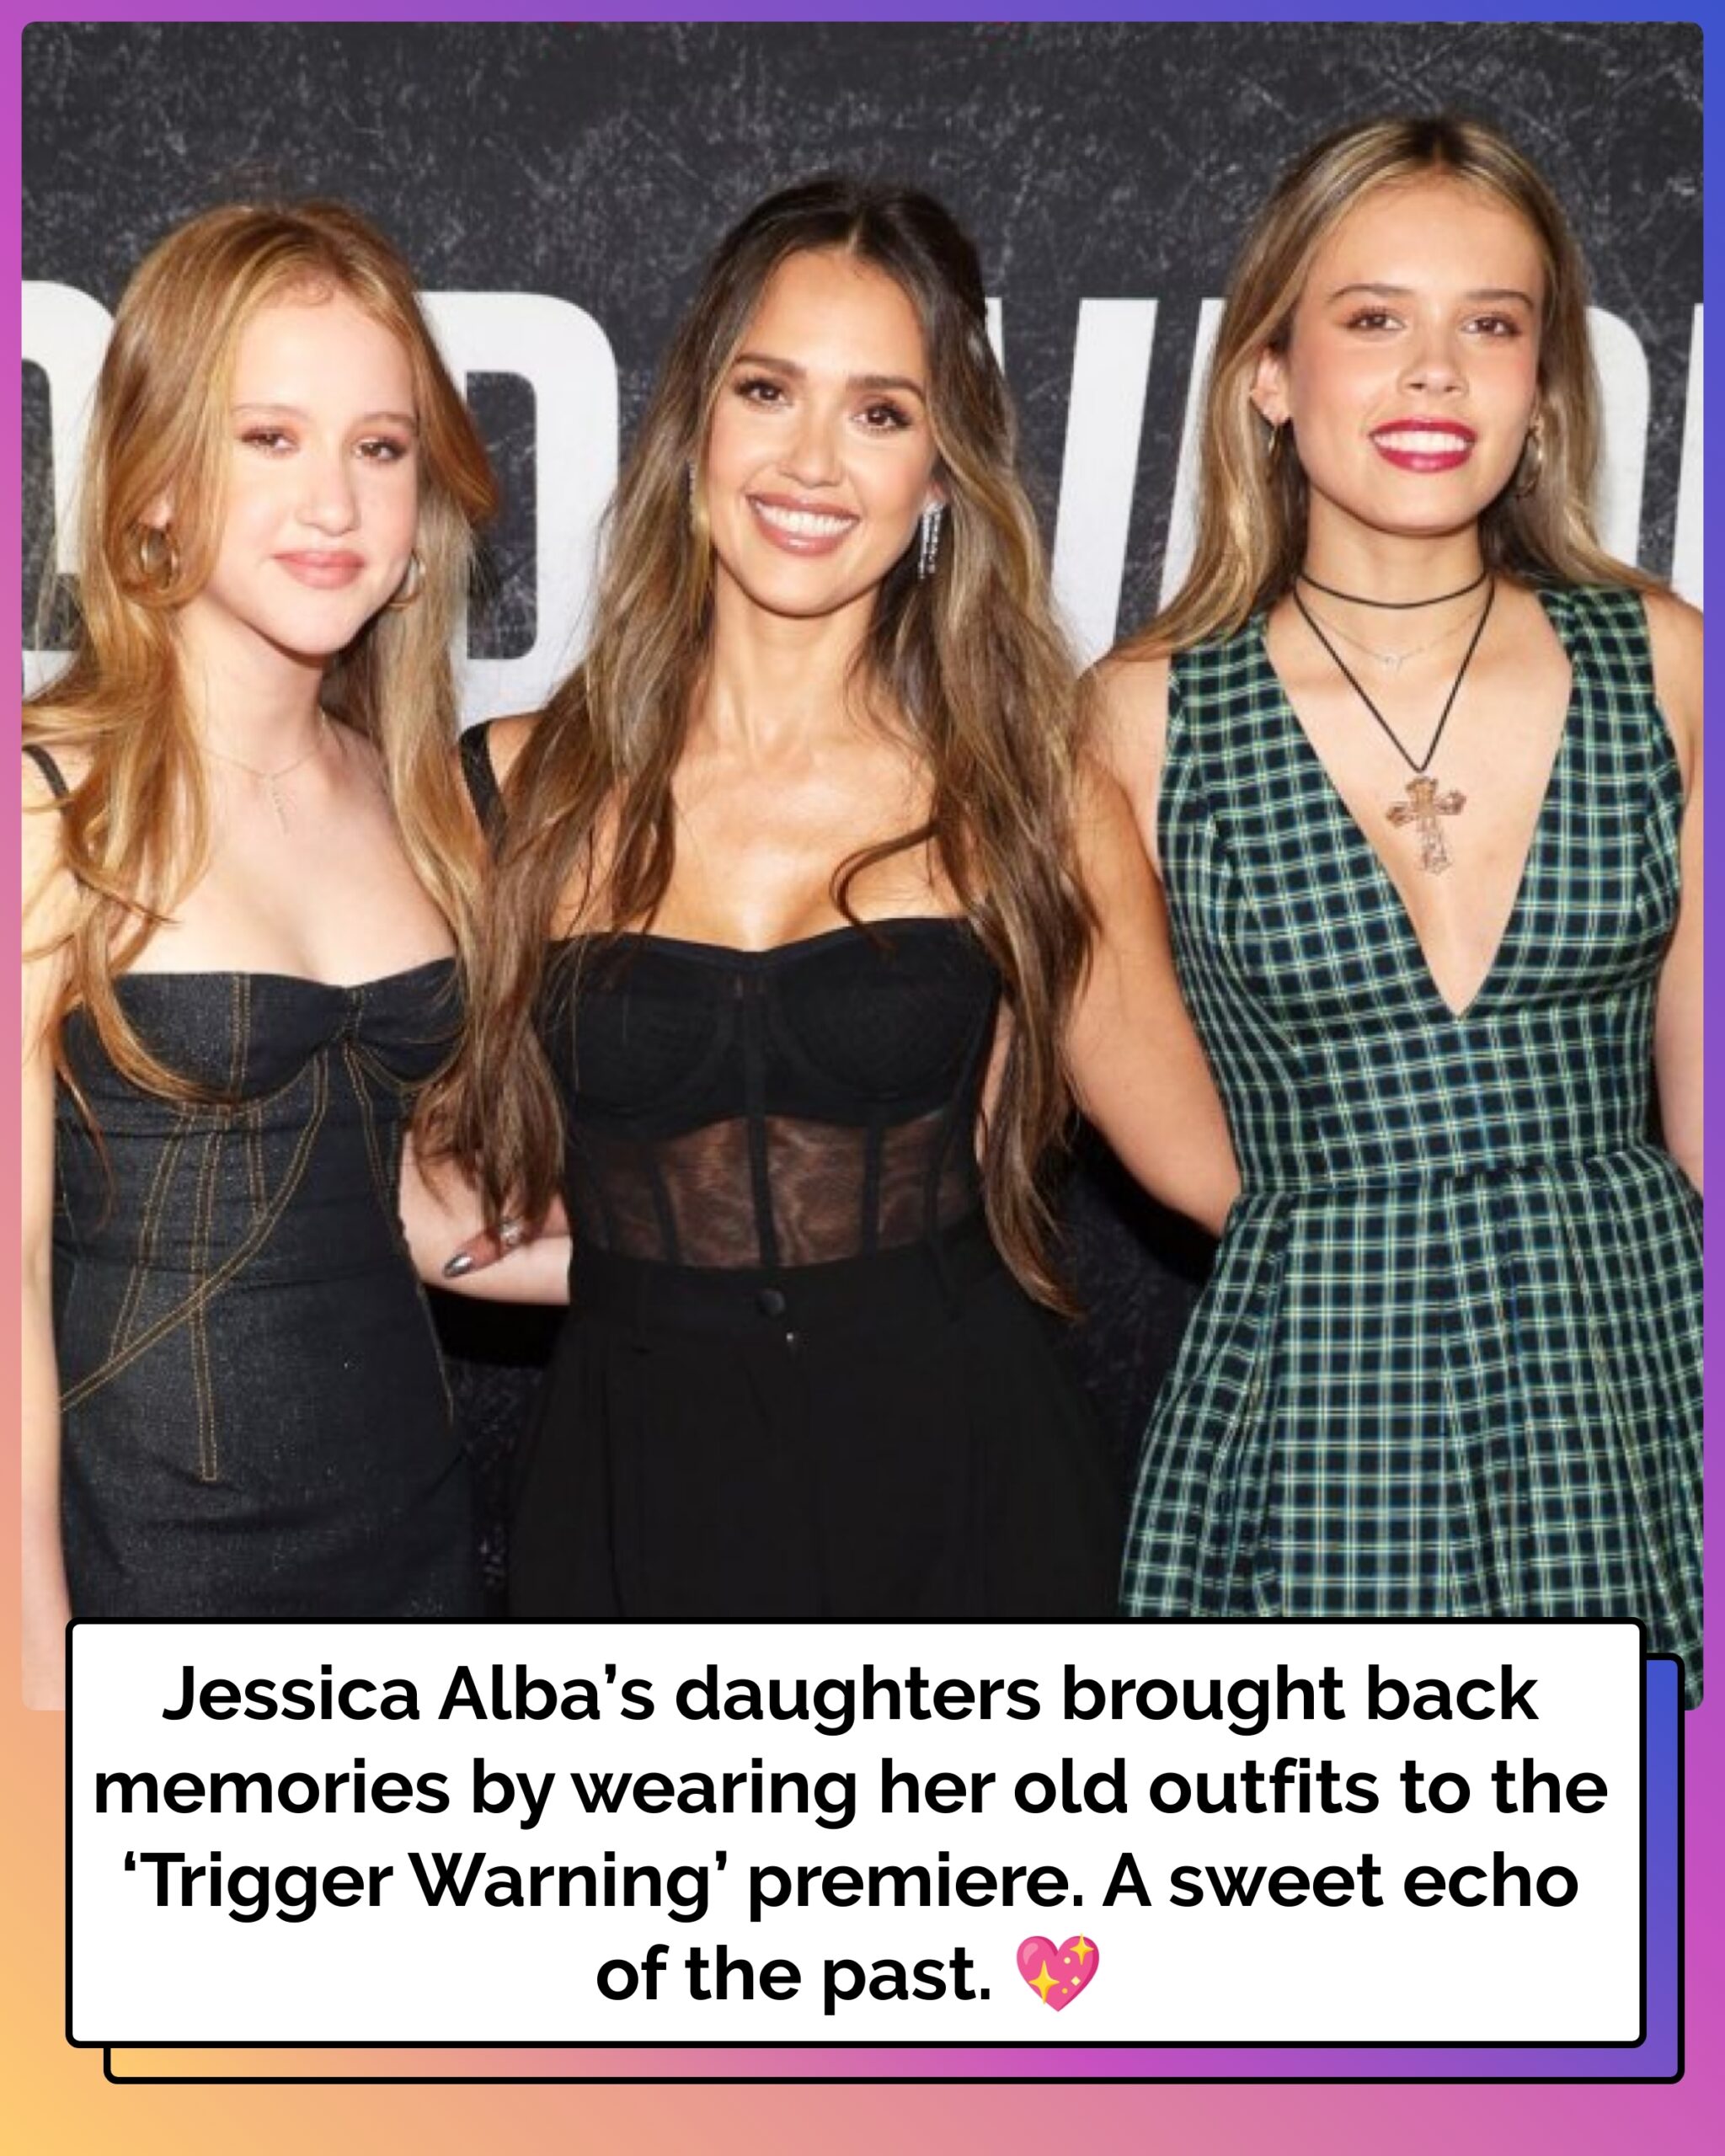 Jessica Alba’s Daughters Borrow Her Archived Looks for ‘Trigger Warning’ Premiere